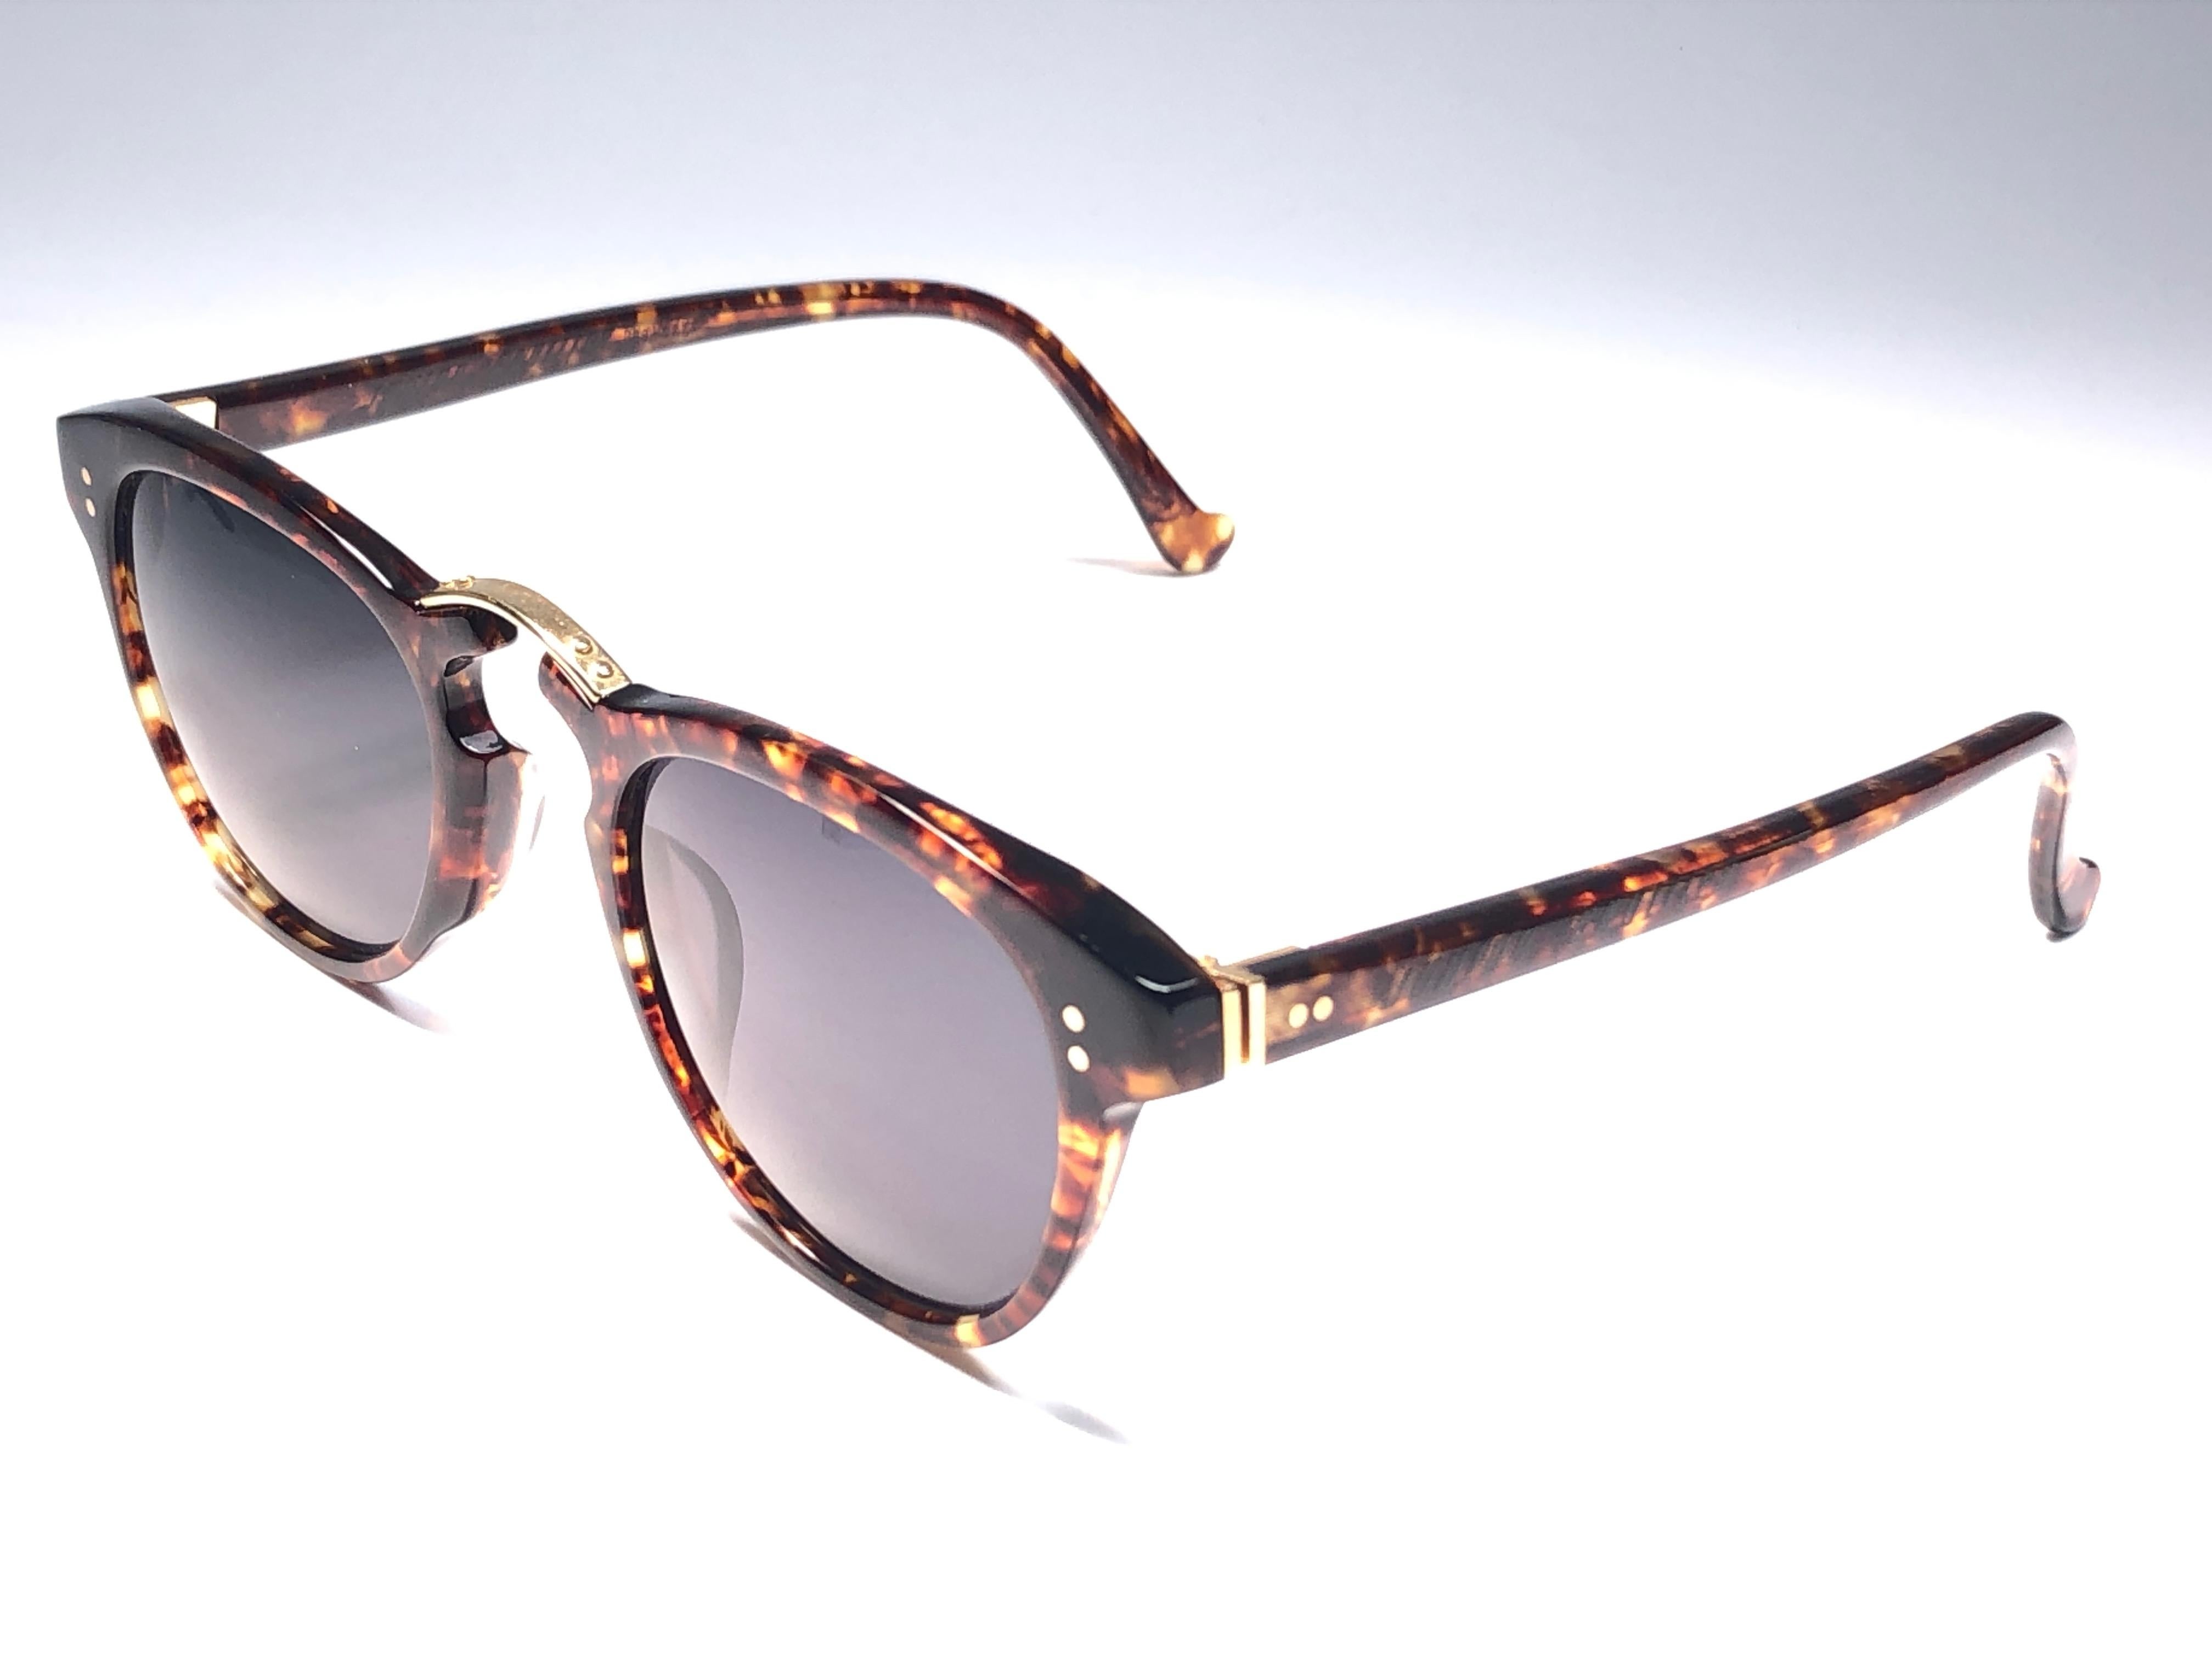 New Vintage Jean Paul Gaultier Junior medium frame in dark tortoise pattern.

Design and produced in the 1900's a timeless and iconic piece.
Minor sign of wear due to storage.
A true fashion statement.

Front 13 cms
Lens Height 4.5 cms
Lens Width